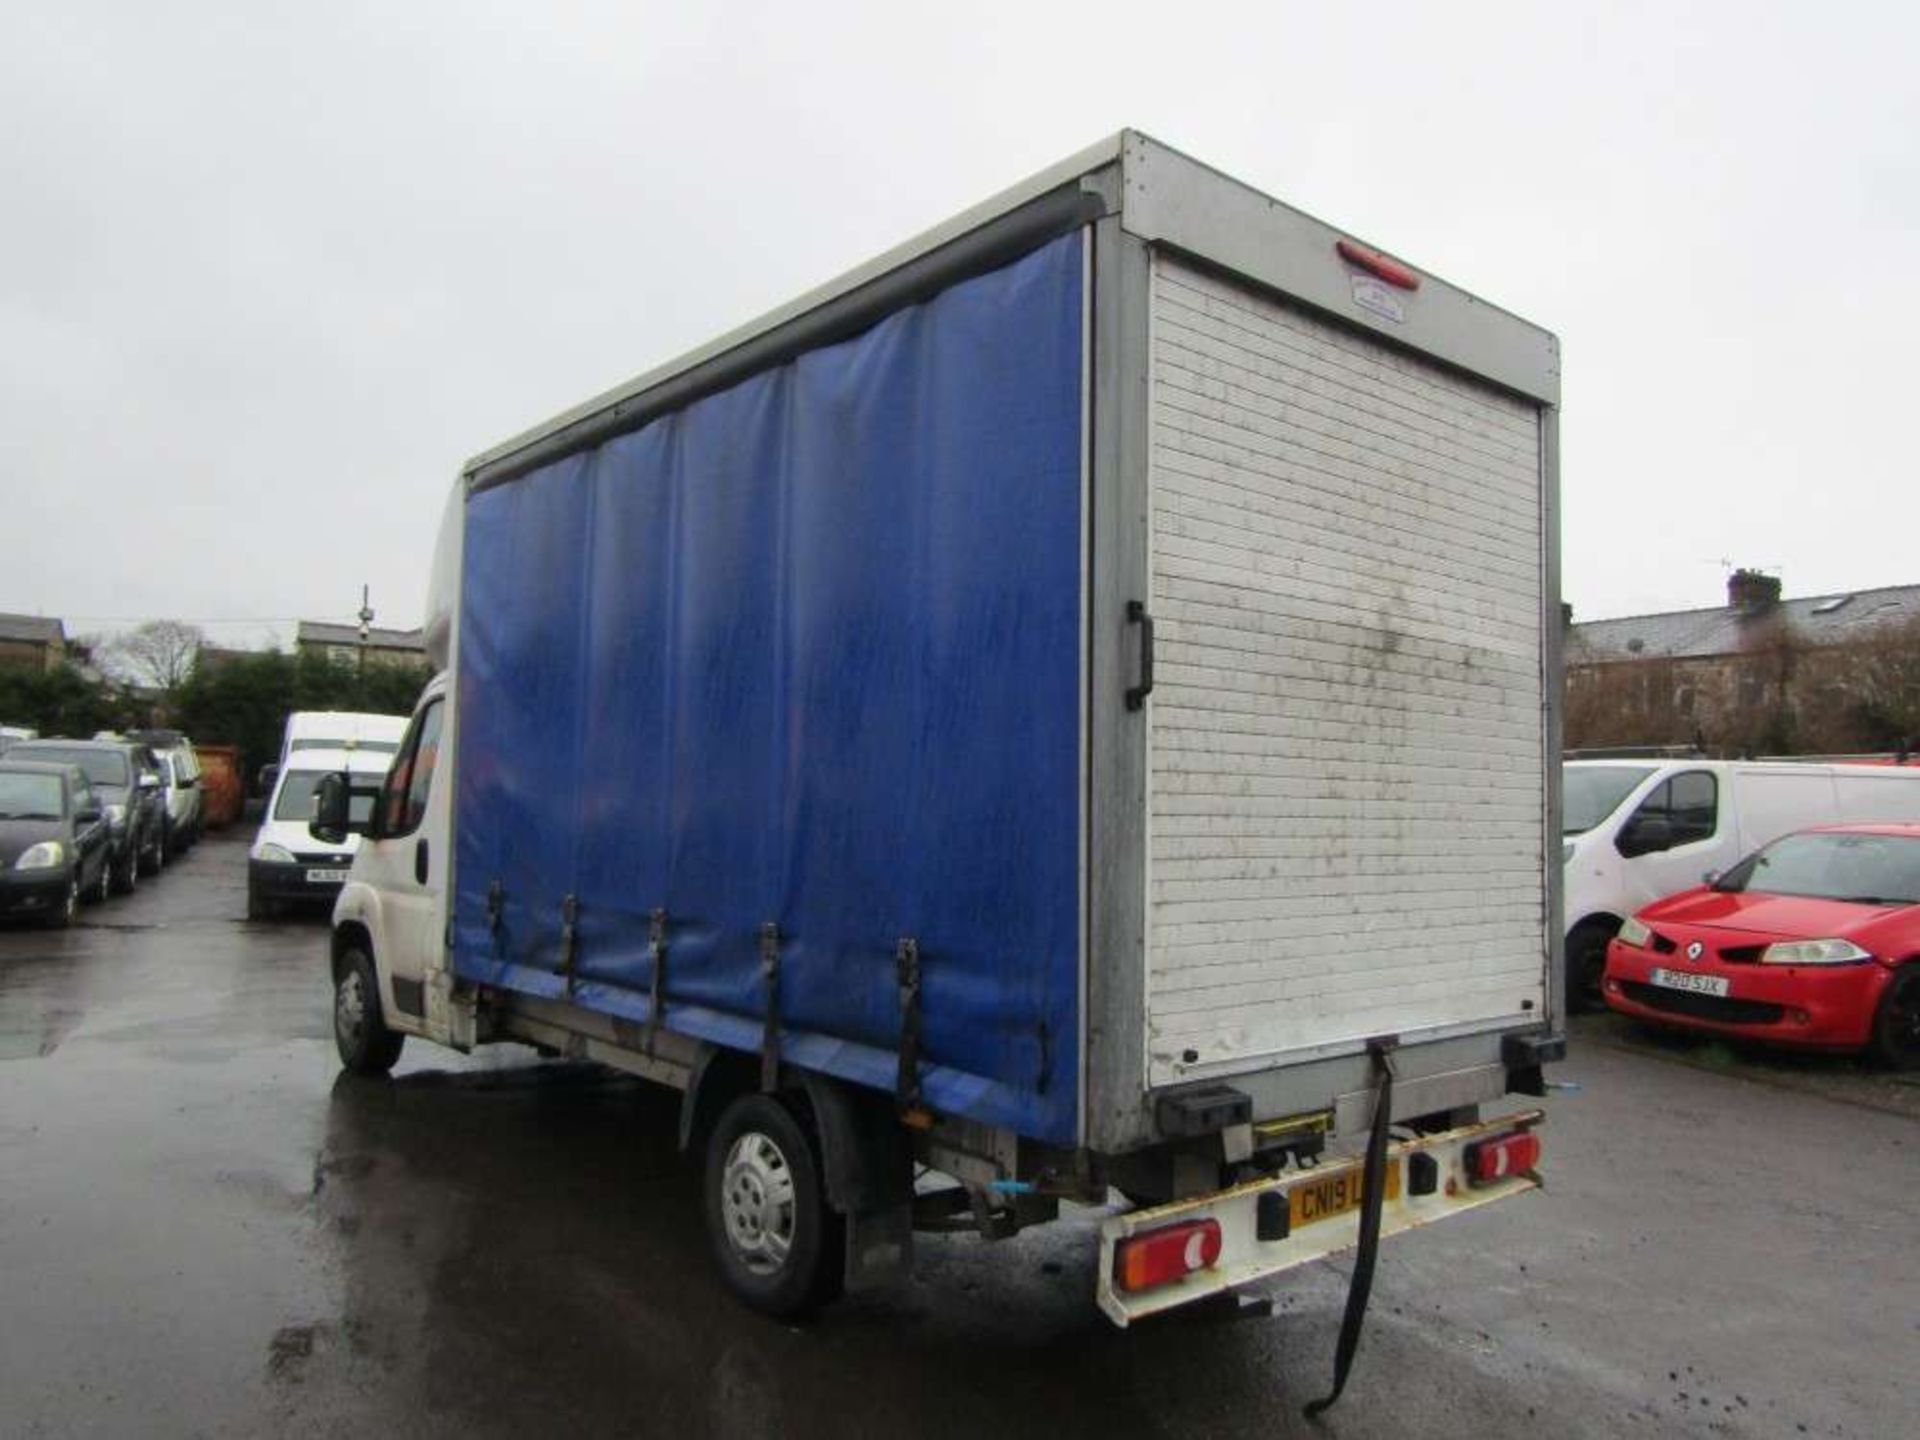 2019 19 reg Peugeot Boxer 335 L3 Blue HDI Curtain Sider - Image 3 of 7